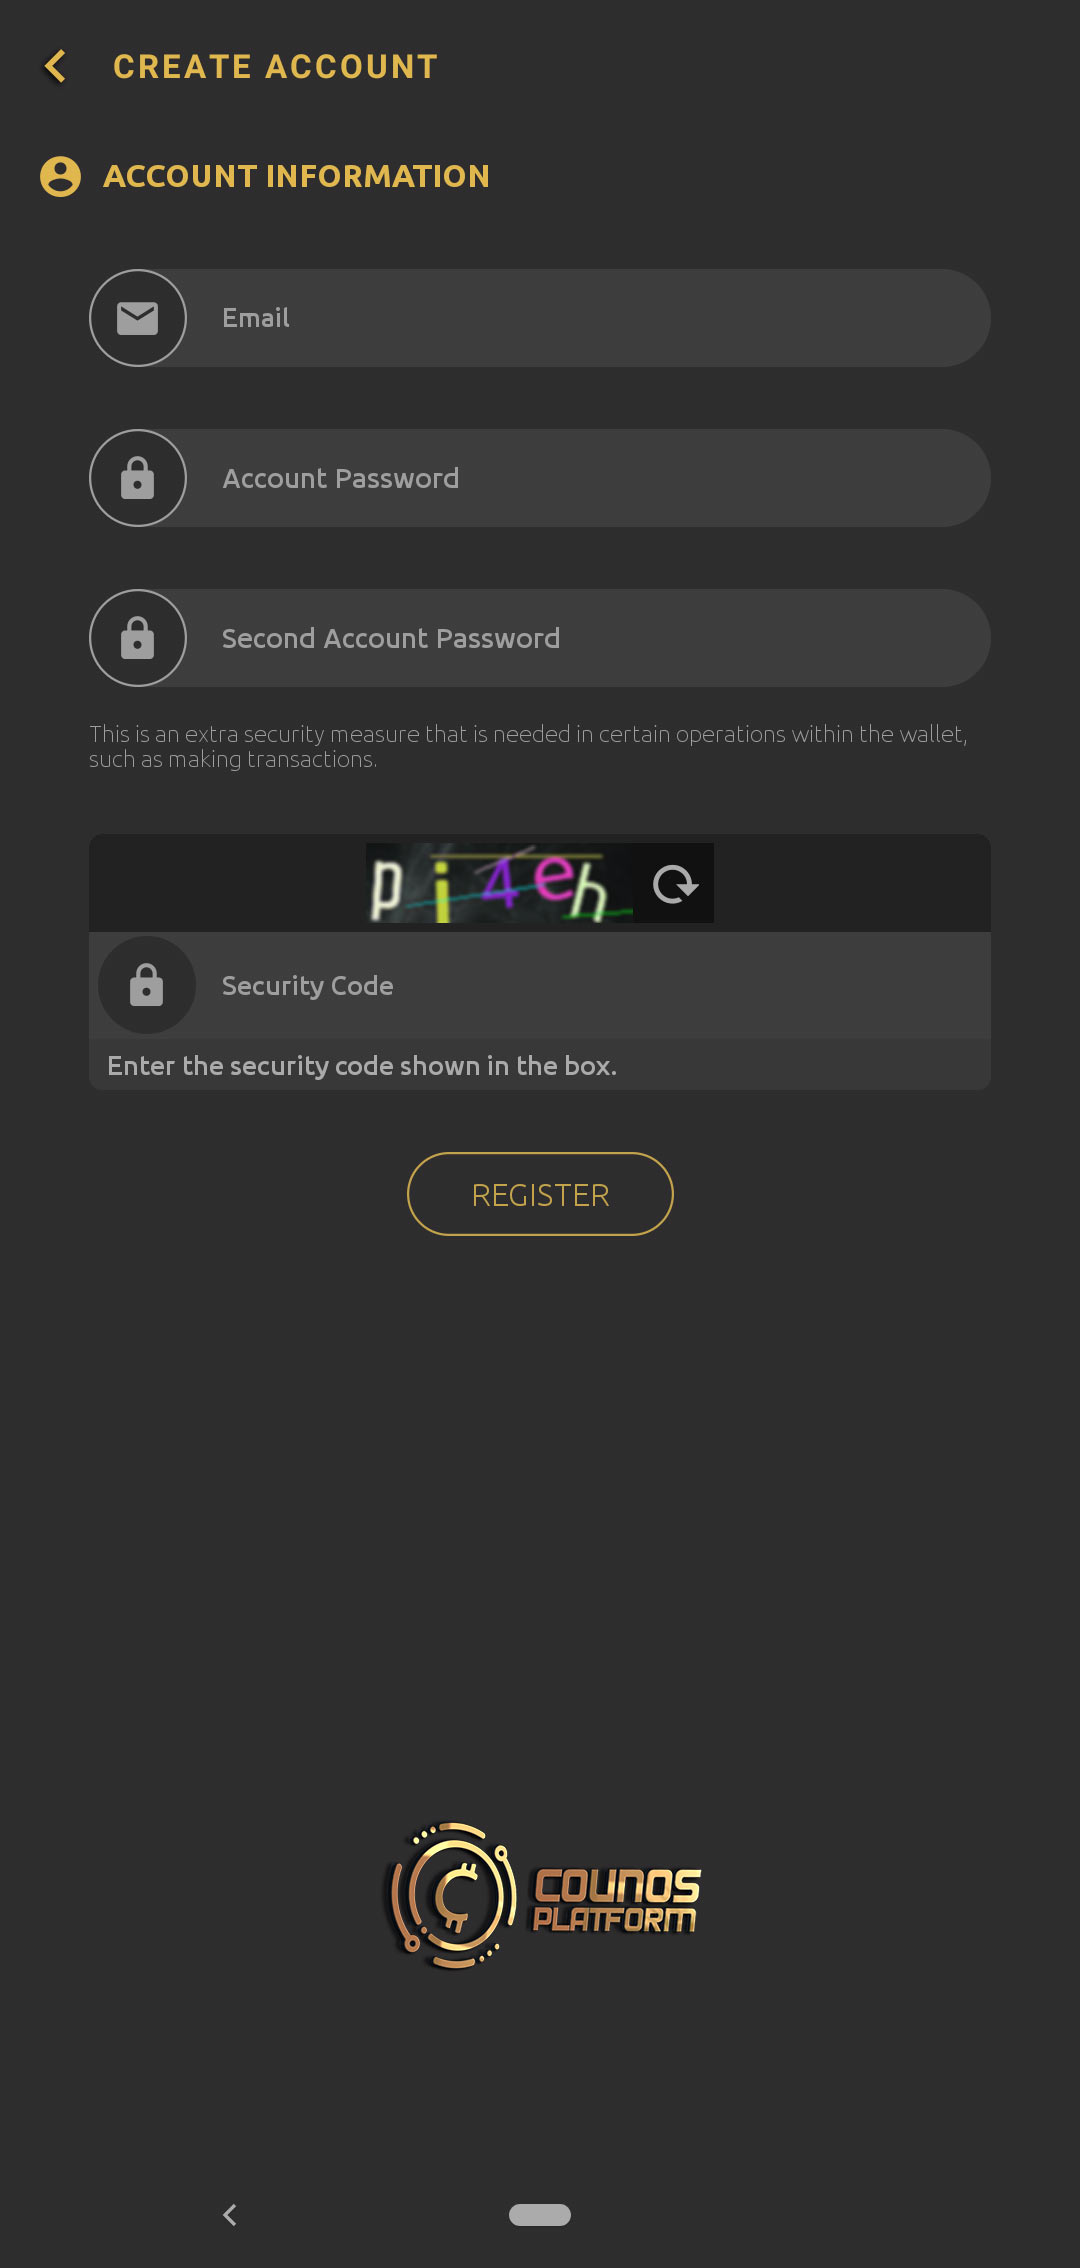 After accepting the rules of Counos Platform you will be redirected to       this page in which you need to submit your information and make sure to get a copy of them because you will need these information and passwords in   the future.